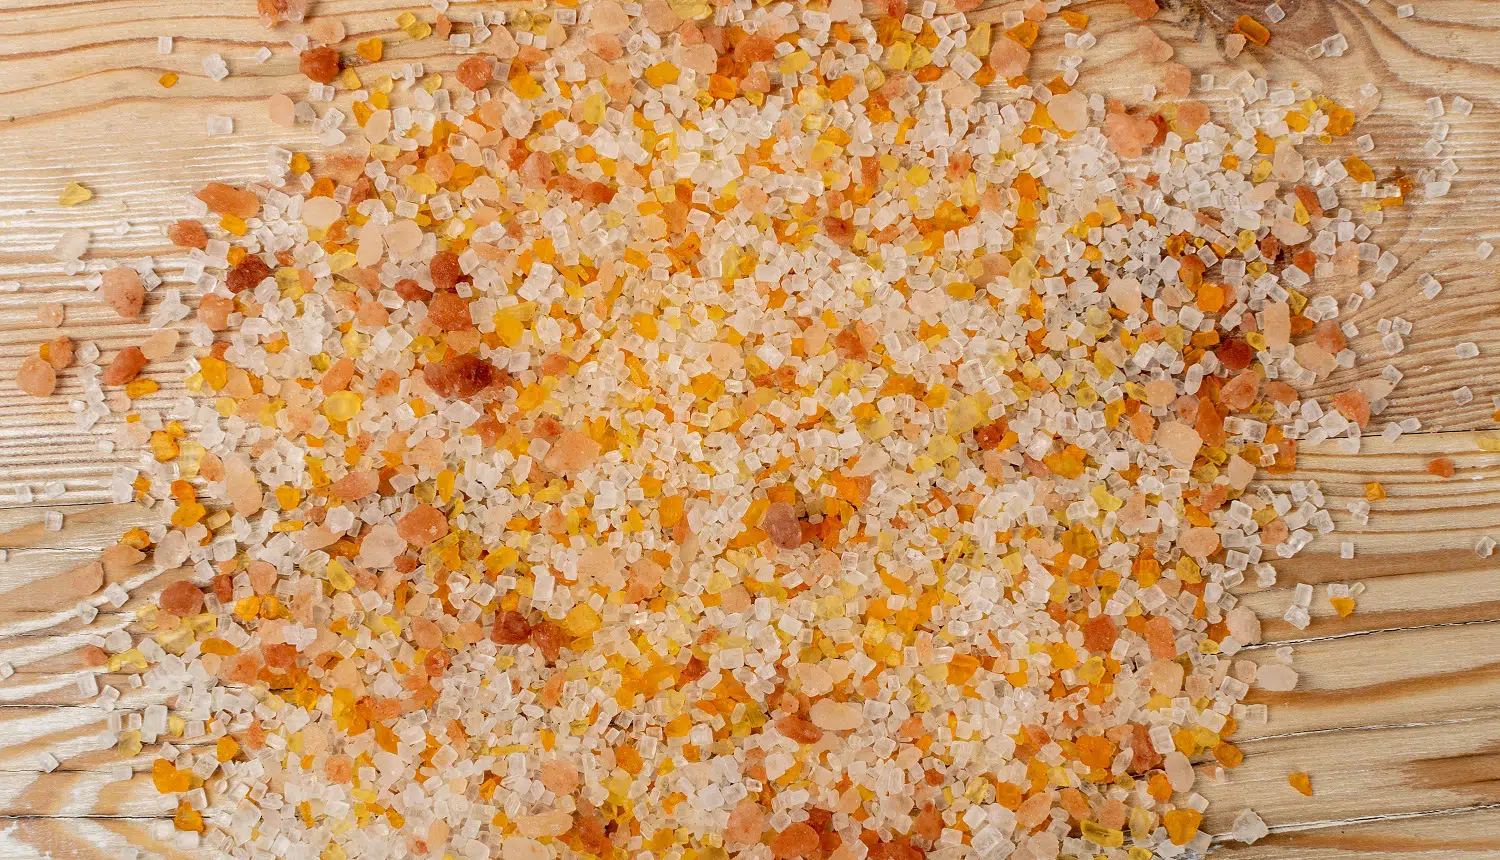 Colorful bath salts texture background top view. Aromatic orange salt crystals for body spa, bathing, beauty treatments, relaxation